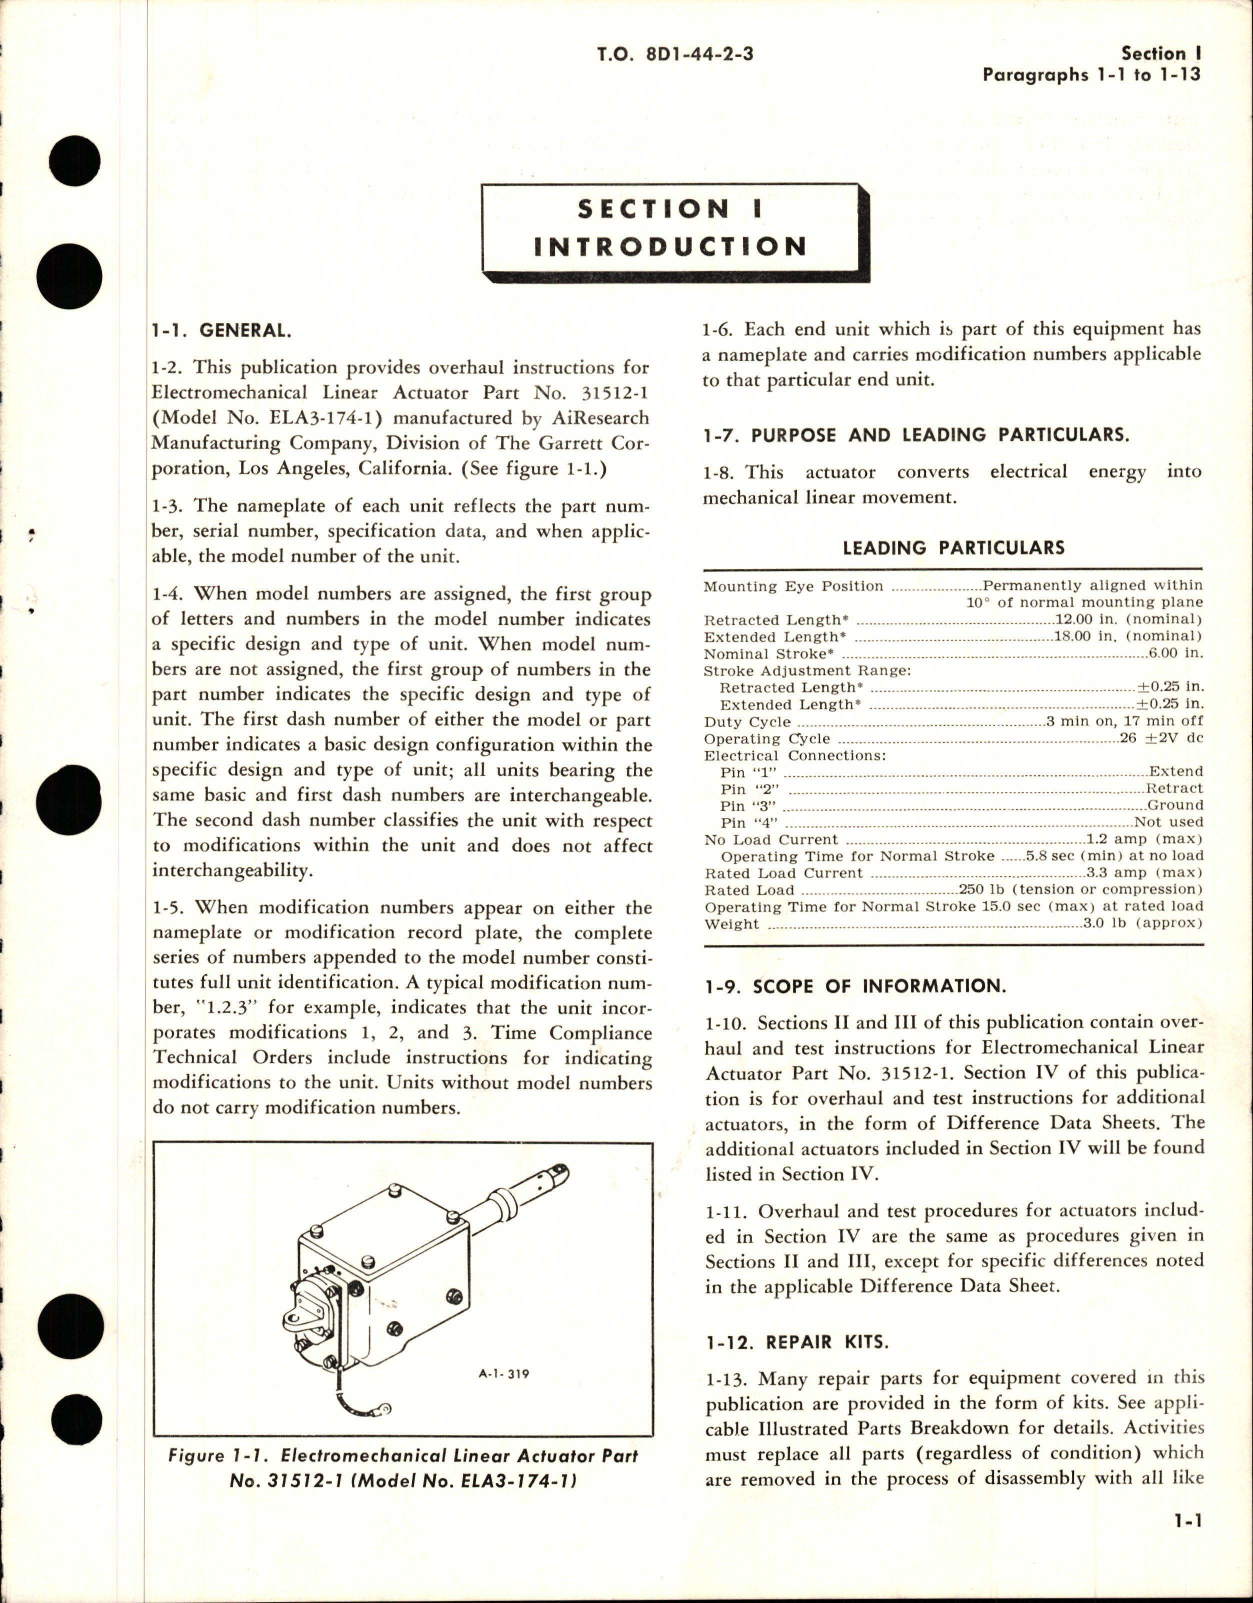 Sample page 5 from AirCorps Library document: Overhaul for Electromechanical Linear Actuators - Parts 31512 and 31512-1 